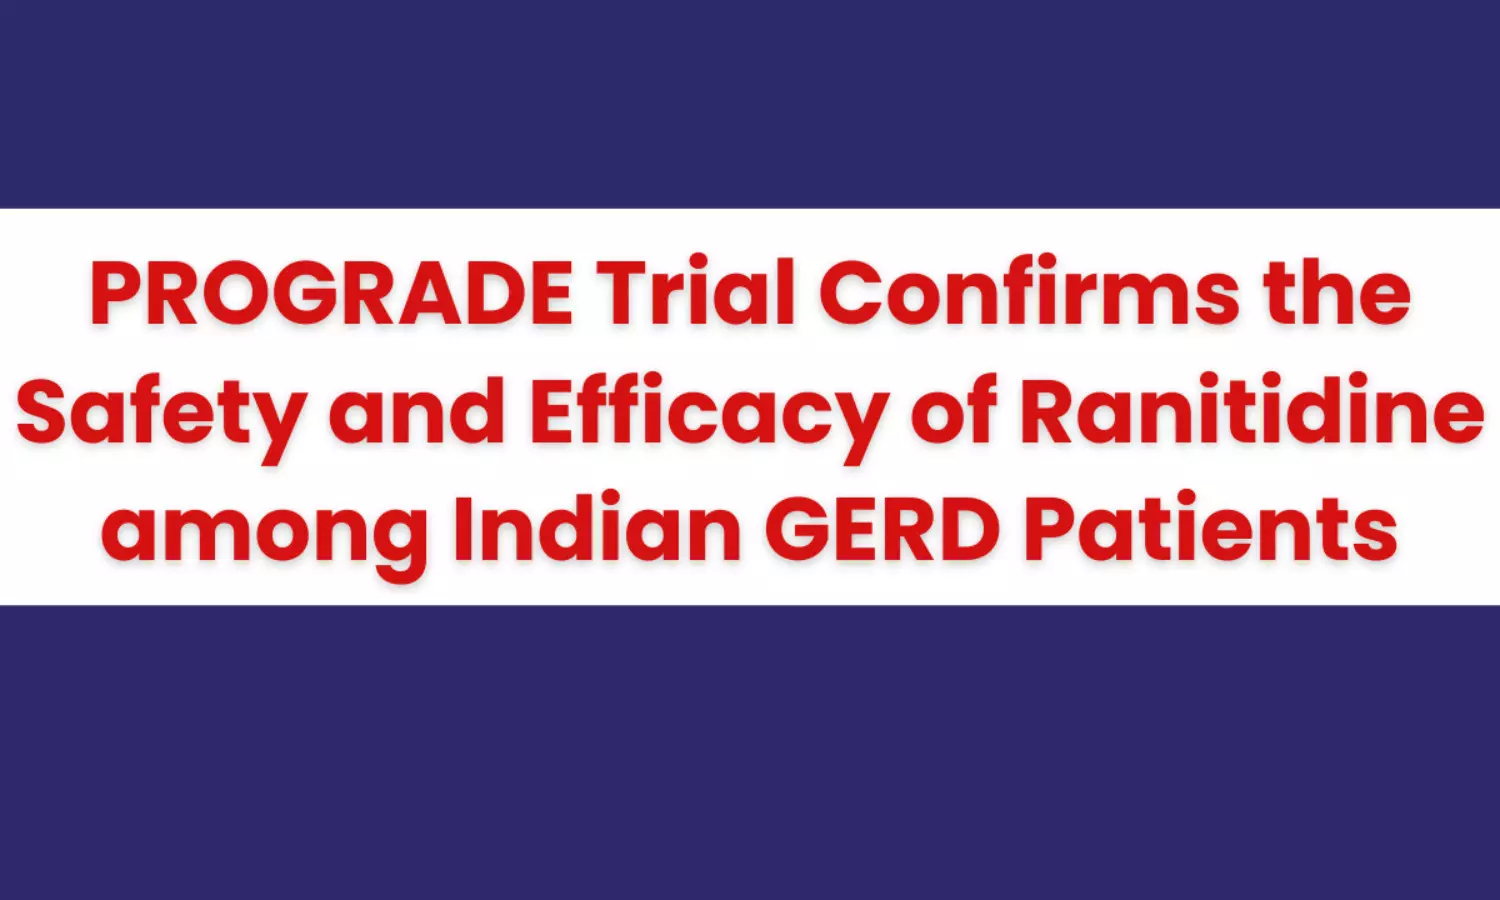 PROGRADE Study Results: Ranitidine HCl Safe & Efficacious among Indian Patients with GERD